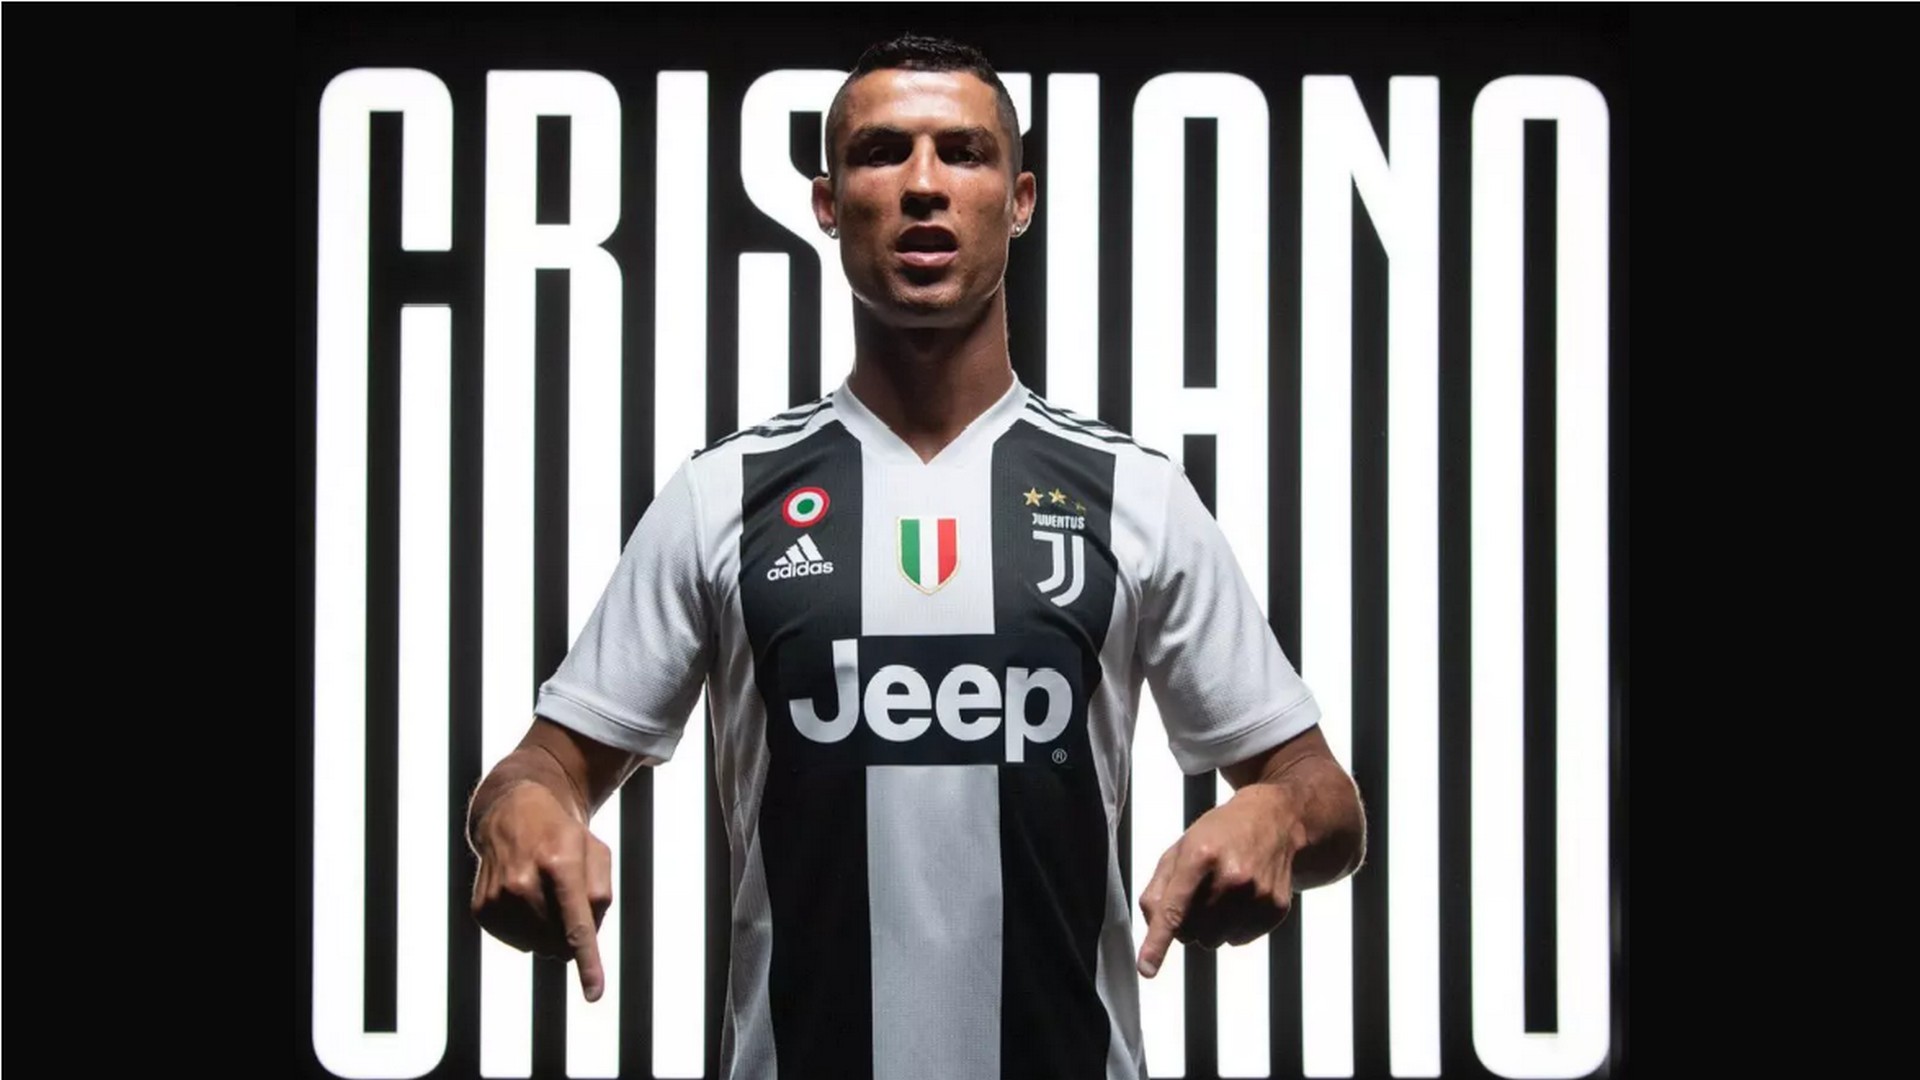 Wallpaper Cristiano Ronaldo Juventus with resolution 1920X1080 pixel. You can use this wallpaper as background for your desktop Computer Screensavers, Android or iPhone smartphones